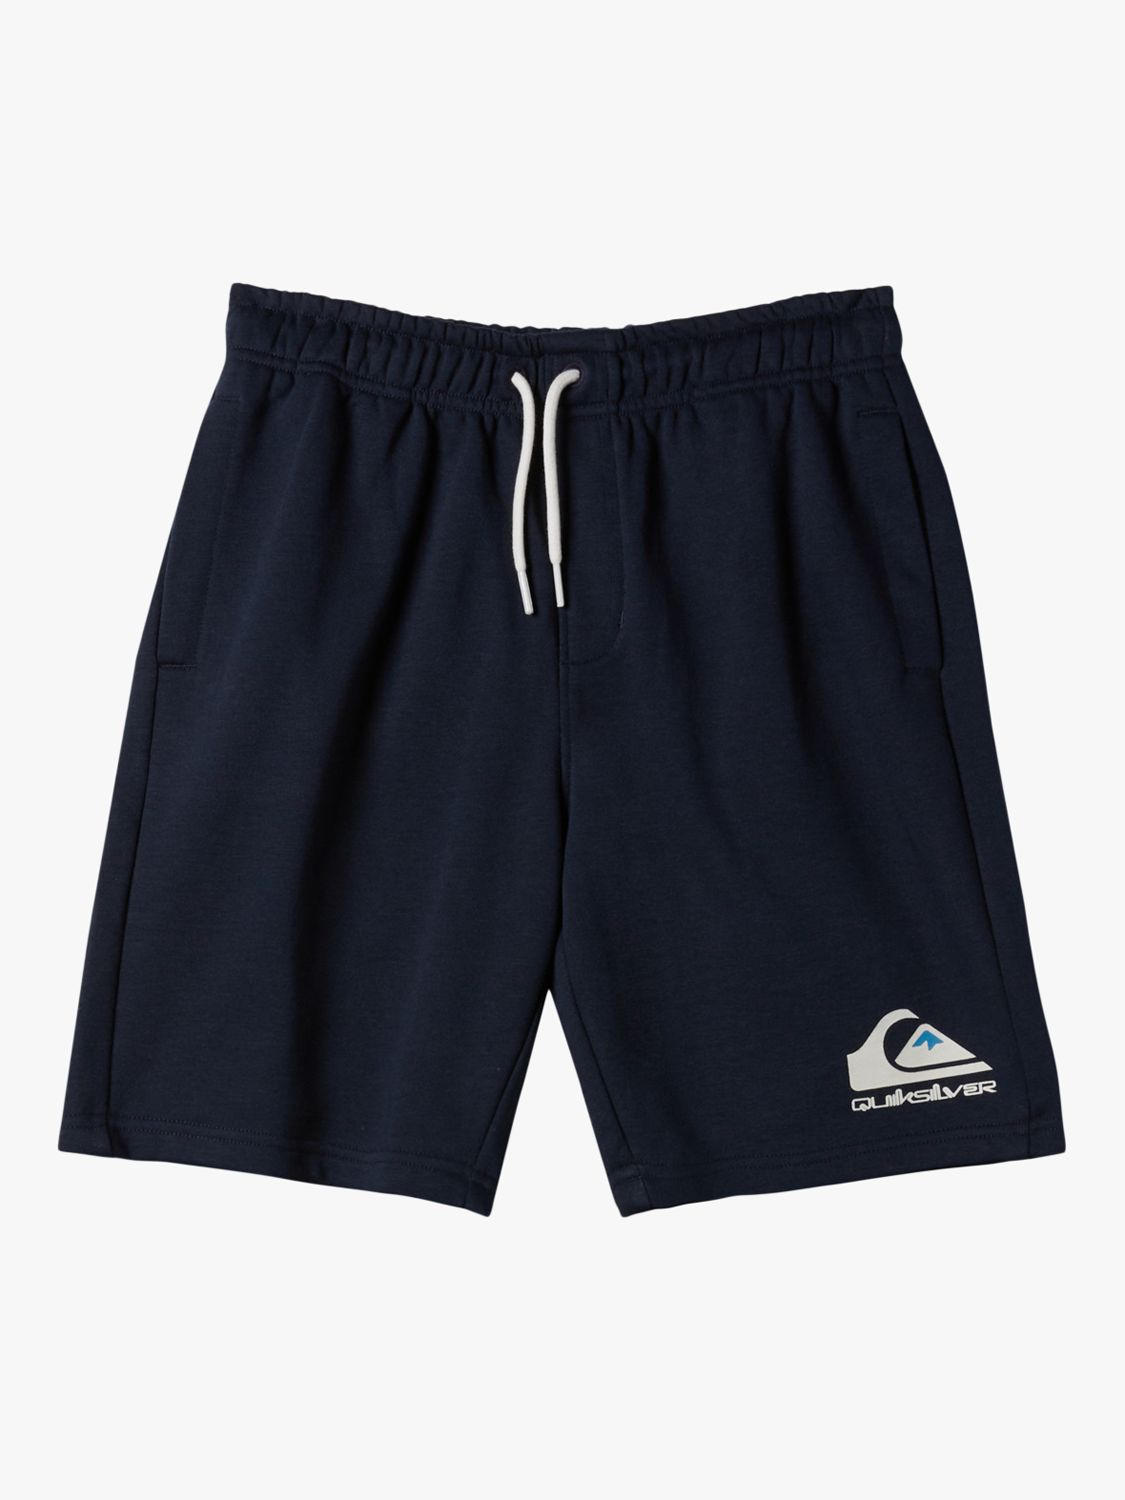 Quiksilver Kids' Easy Day Logo Jogger Shorts, Navy, 16 years